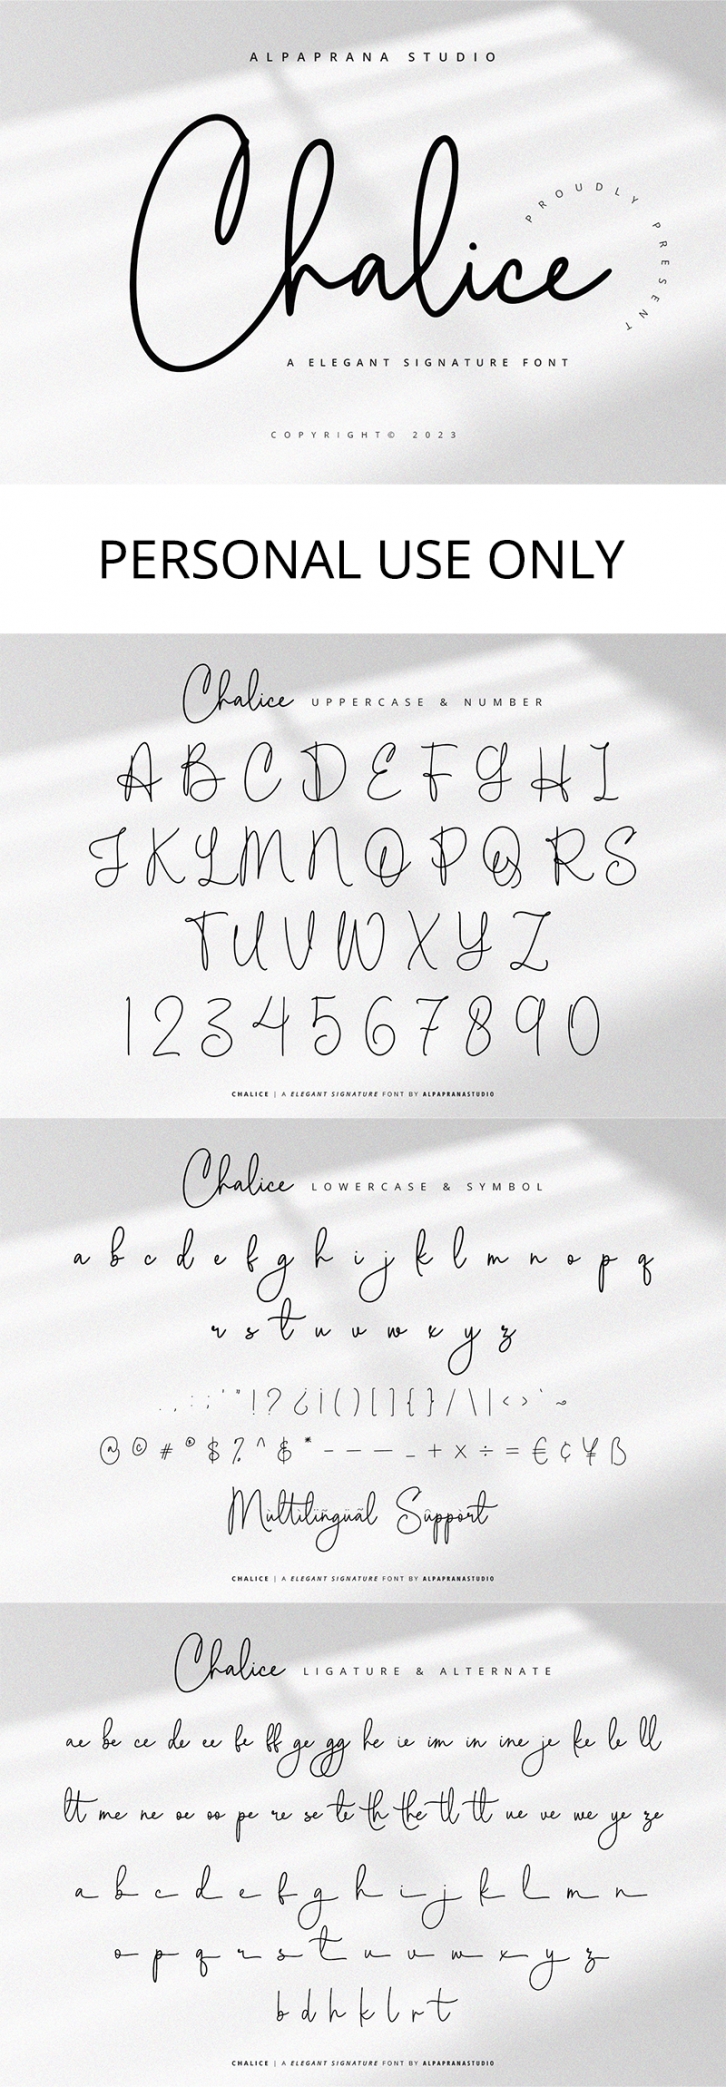 Chalice Font Download